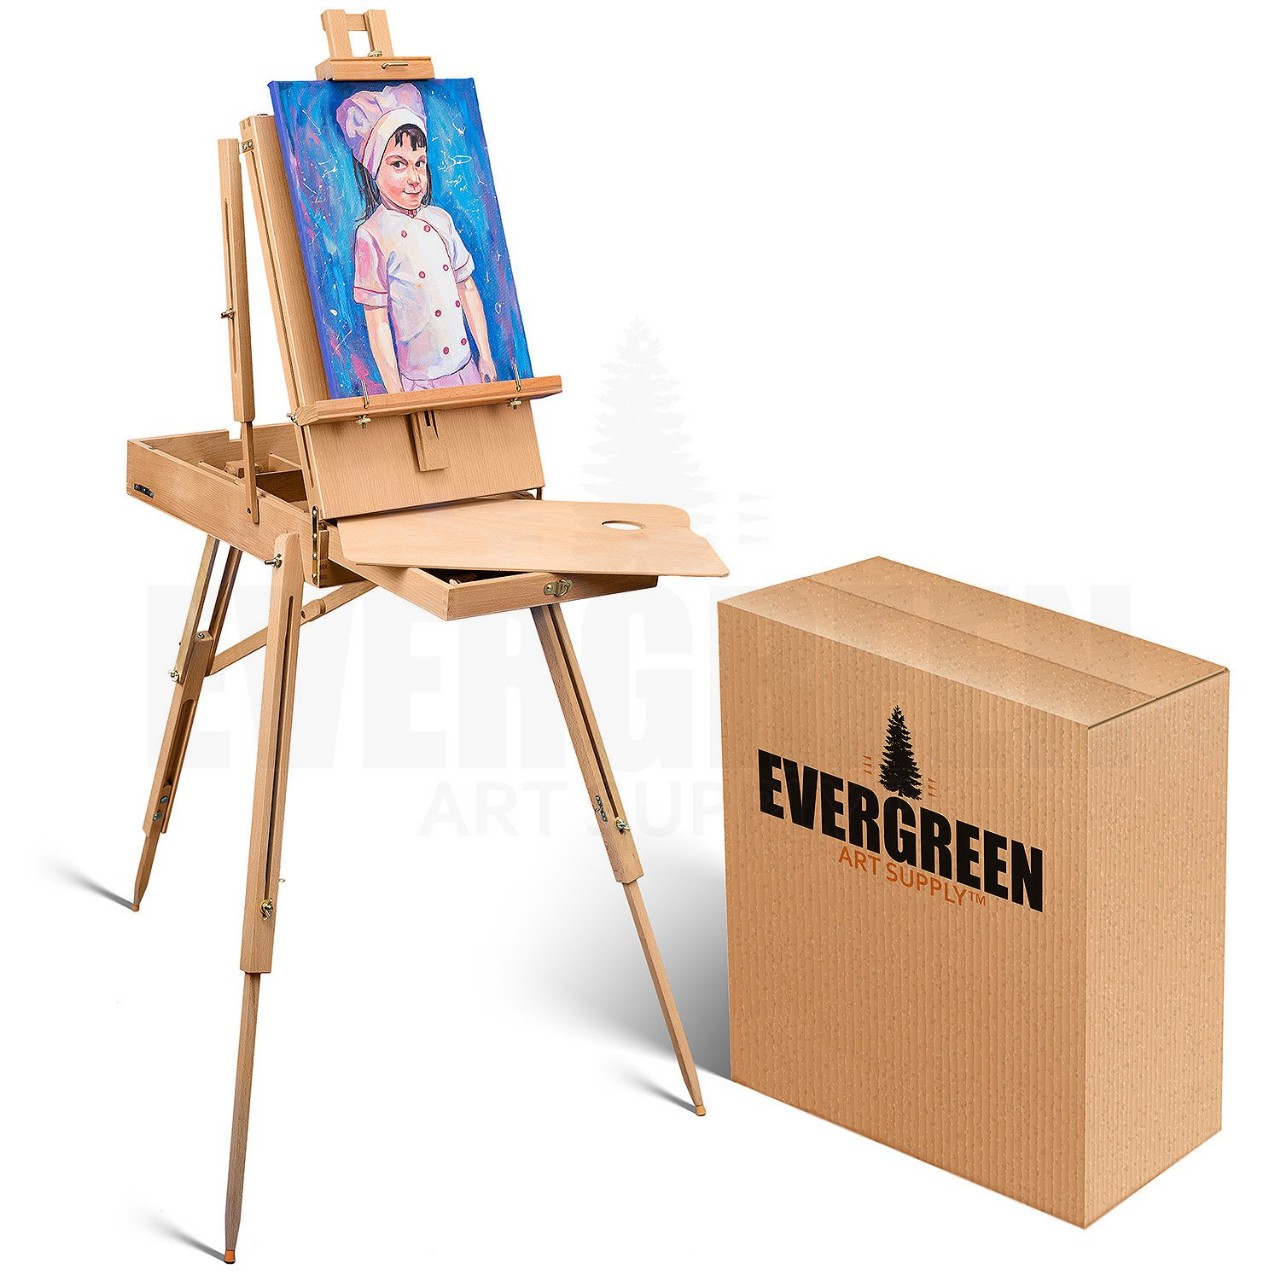 Portable Art Easel for Painting and Drawing - Professional Studio Quality, Adjustable, French Style